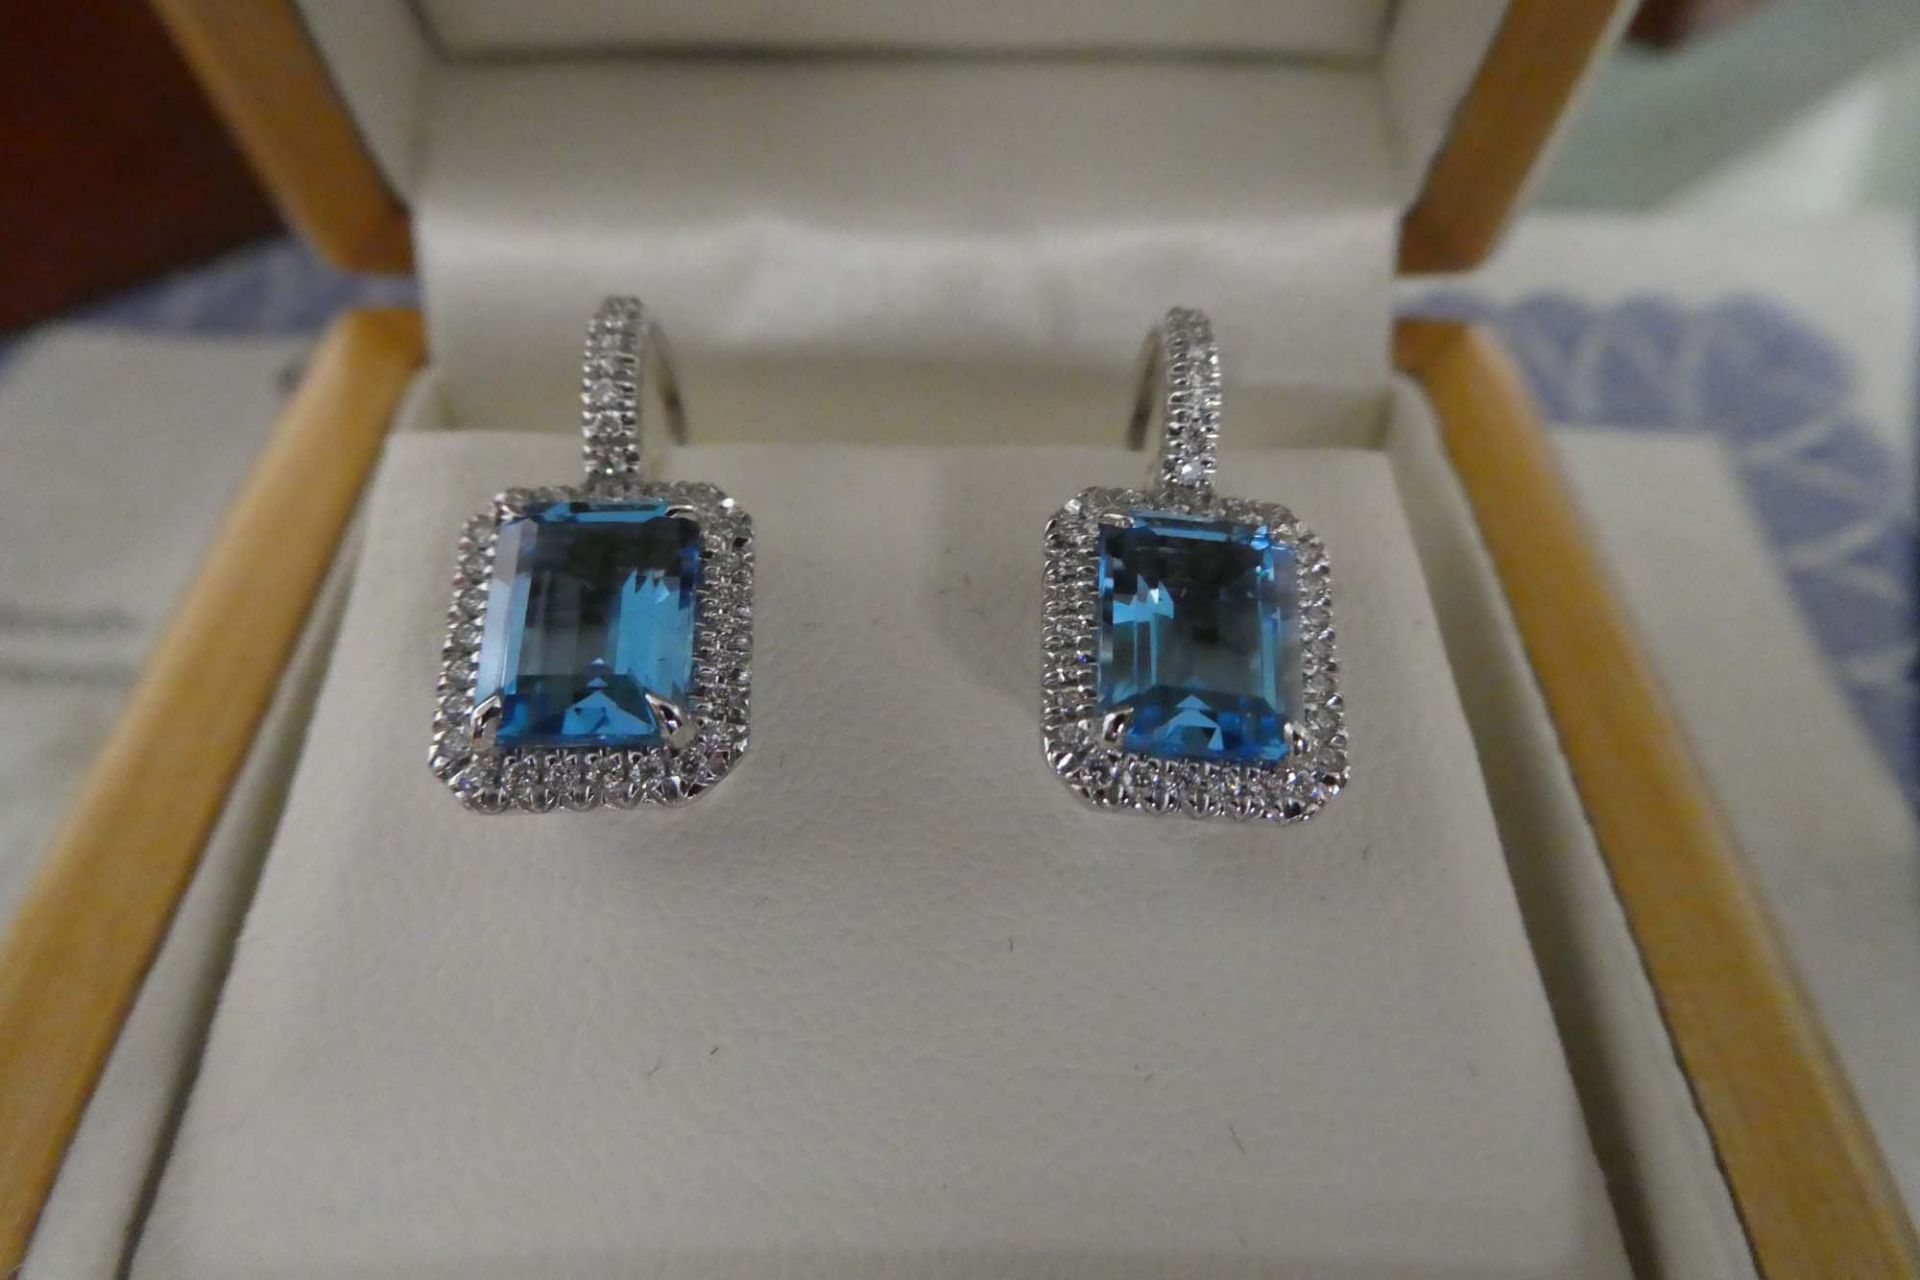 18kt white gold blue topaz and diamond earrings with lever backs with case and certificate